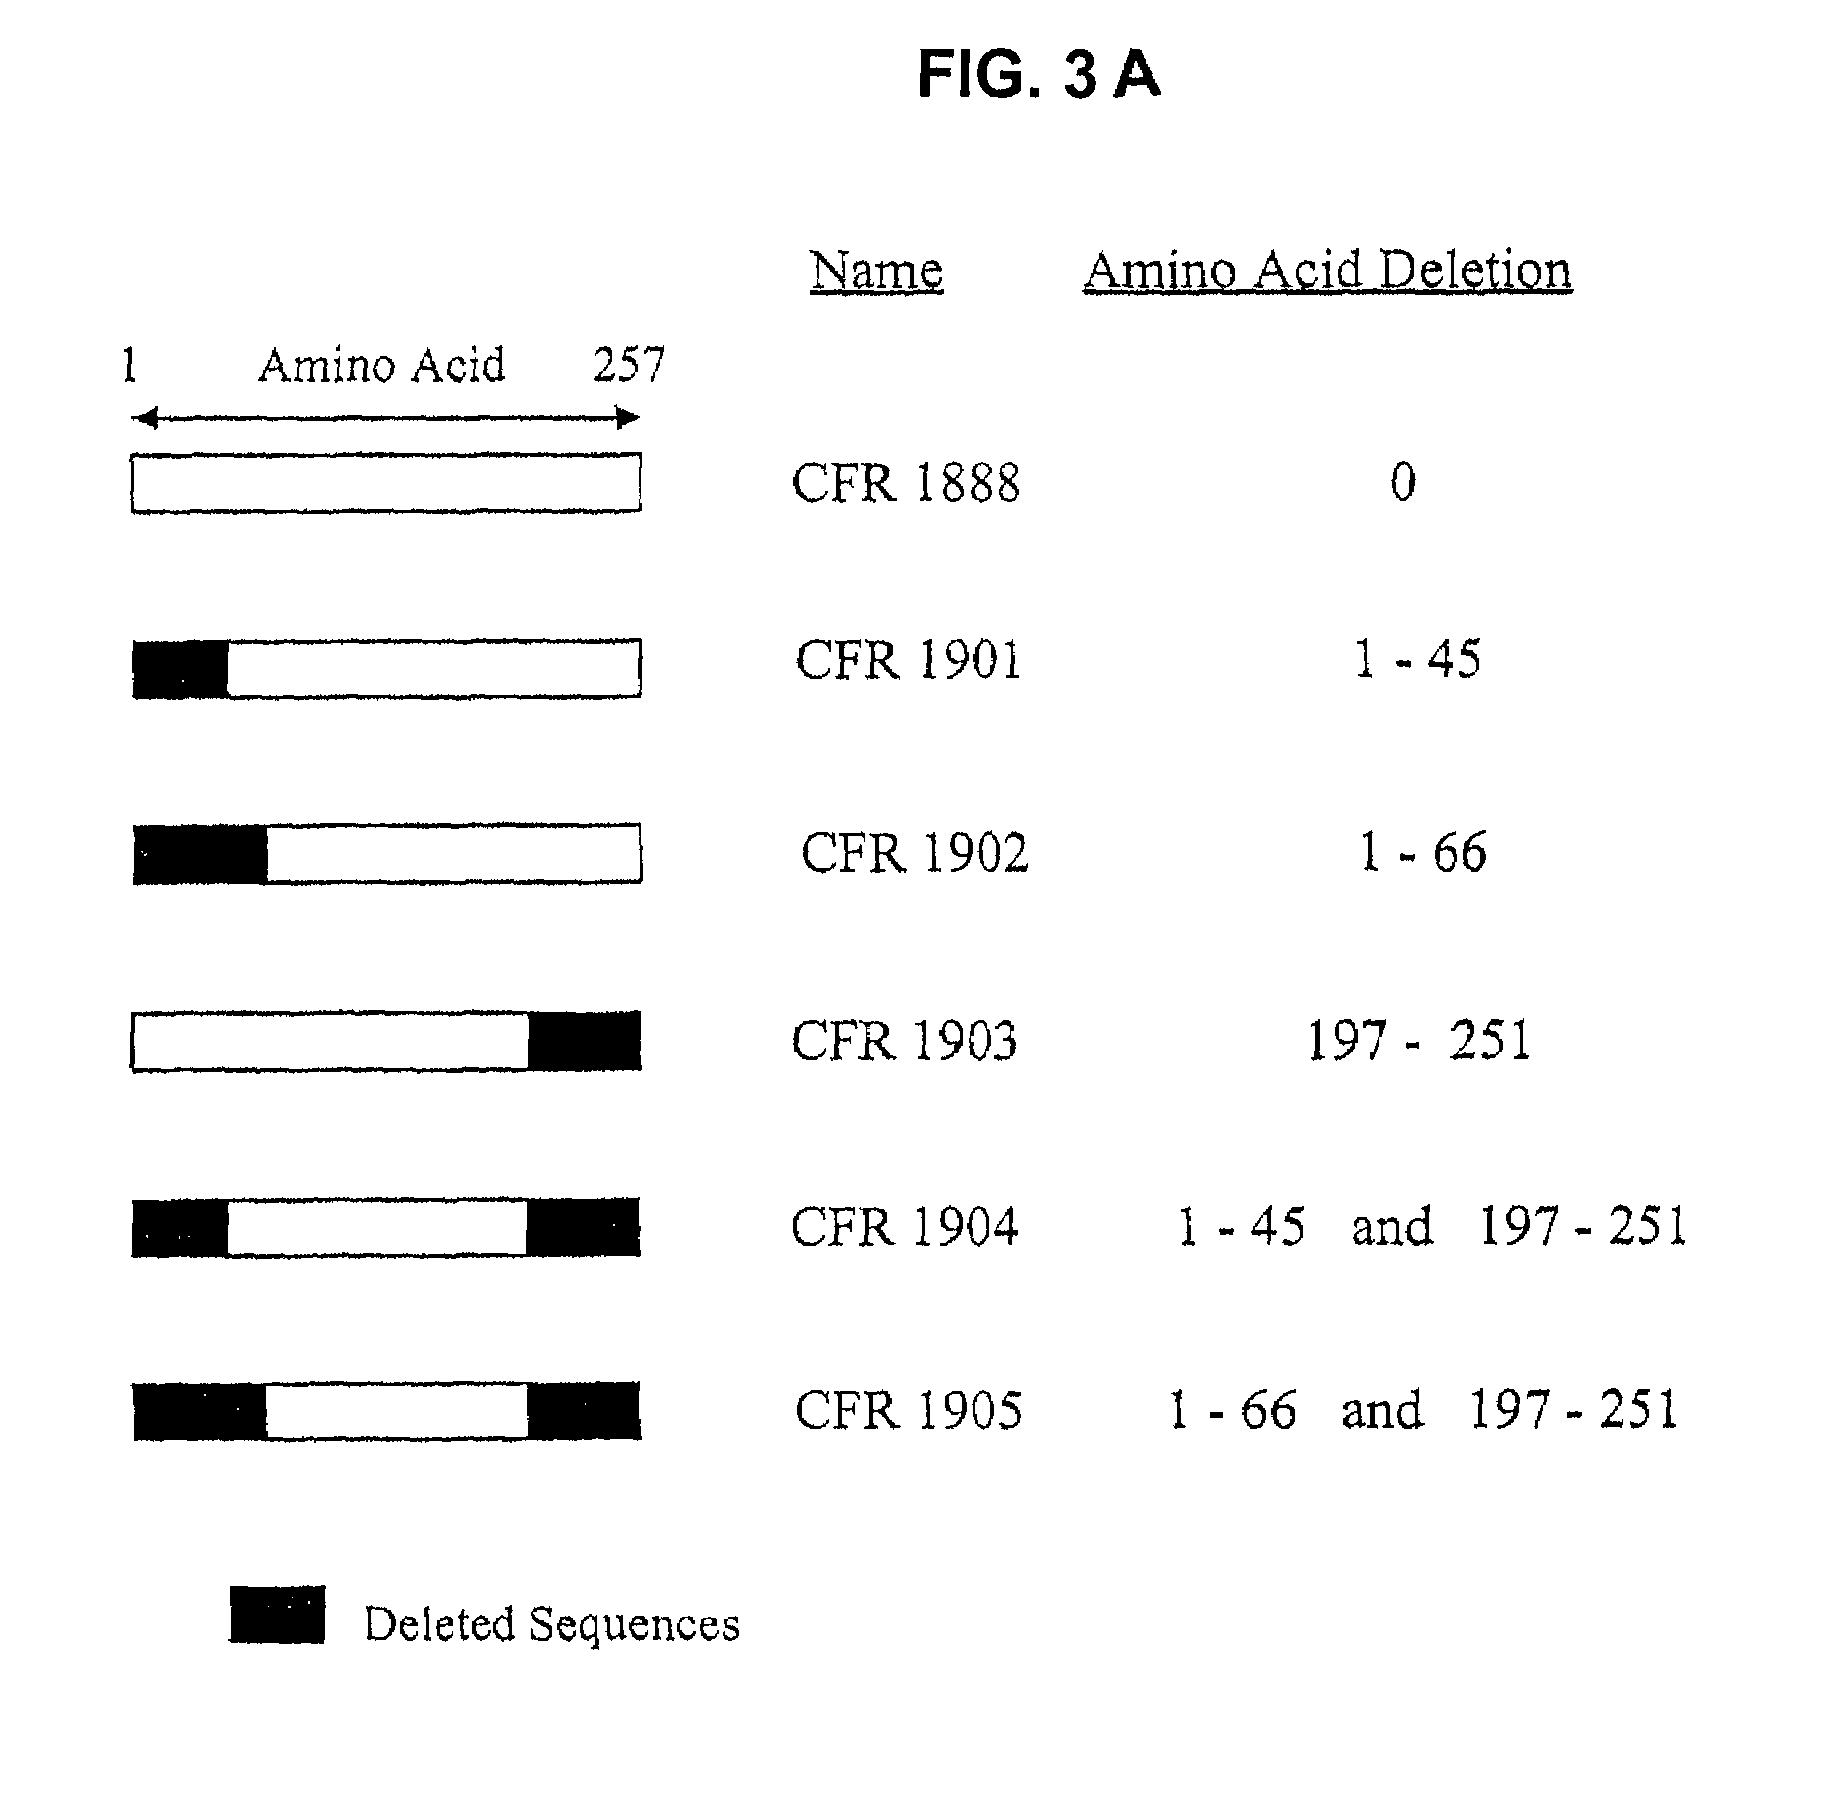 Modified proteins, designer toxins, and methods of making thereof